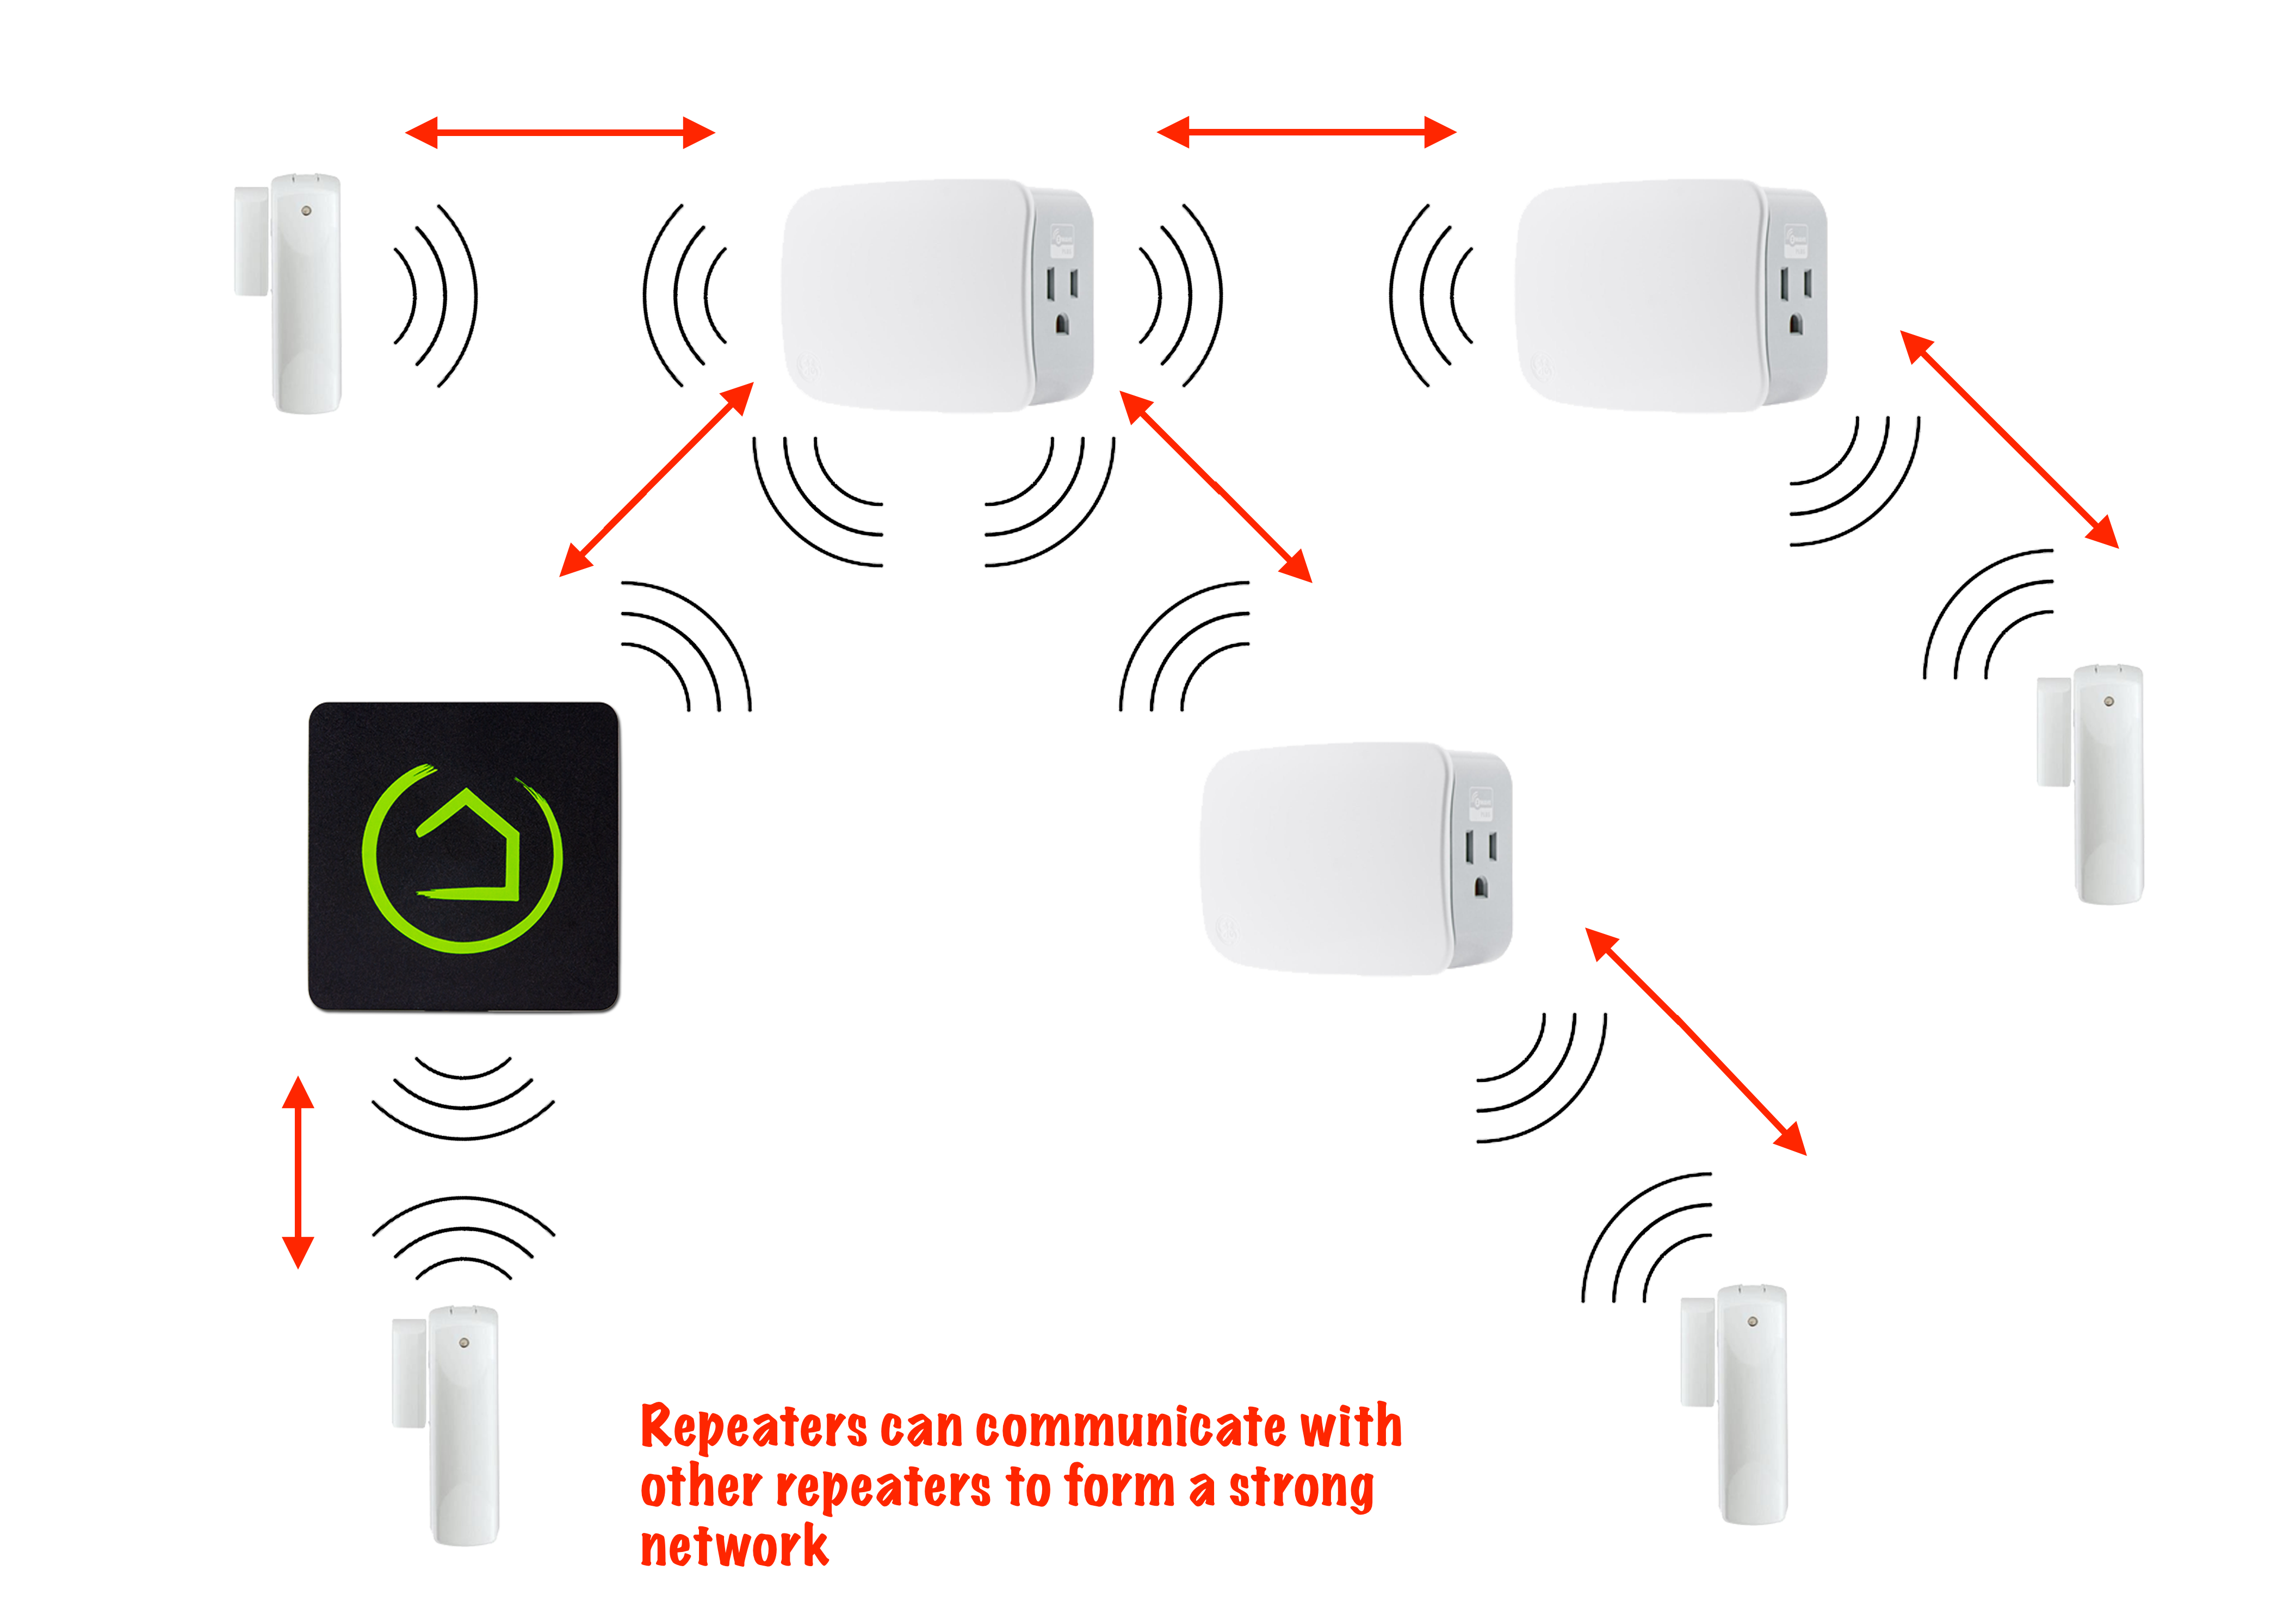 Repeaters can communicate with other repeaters to form a strong network